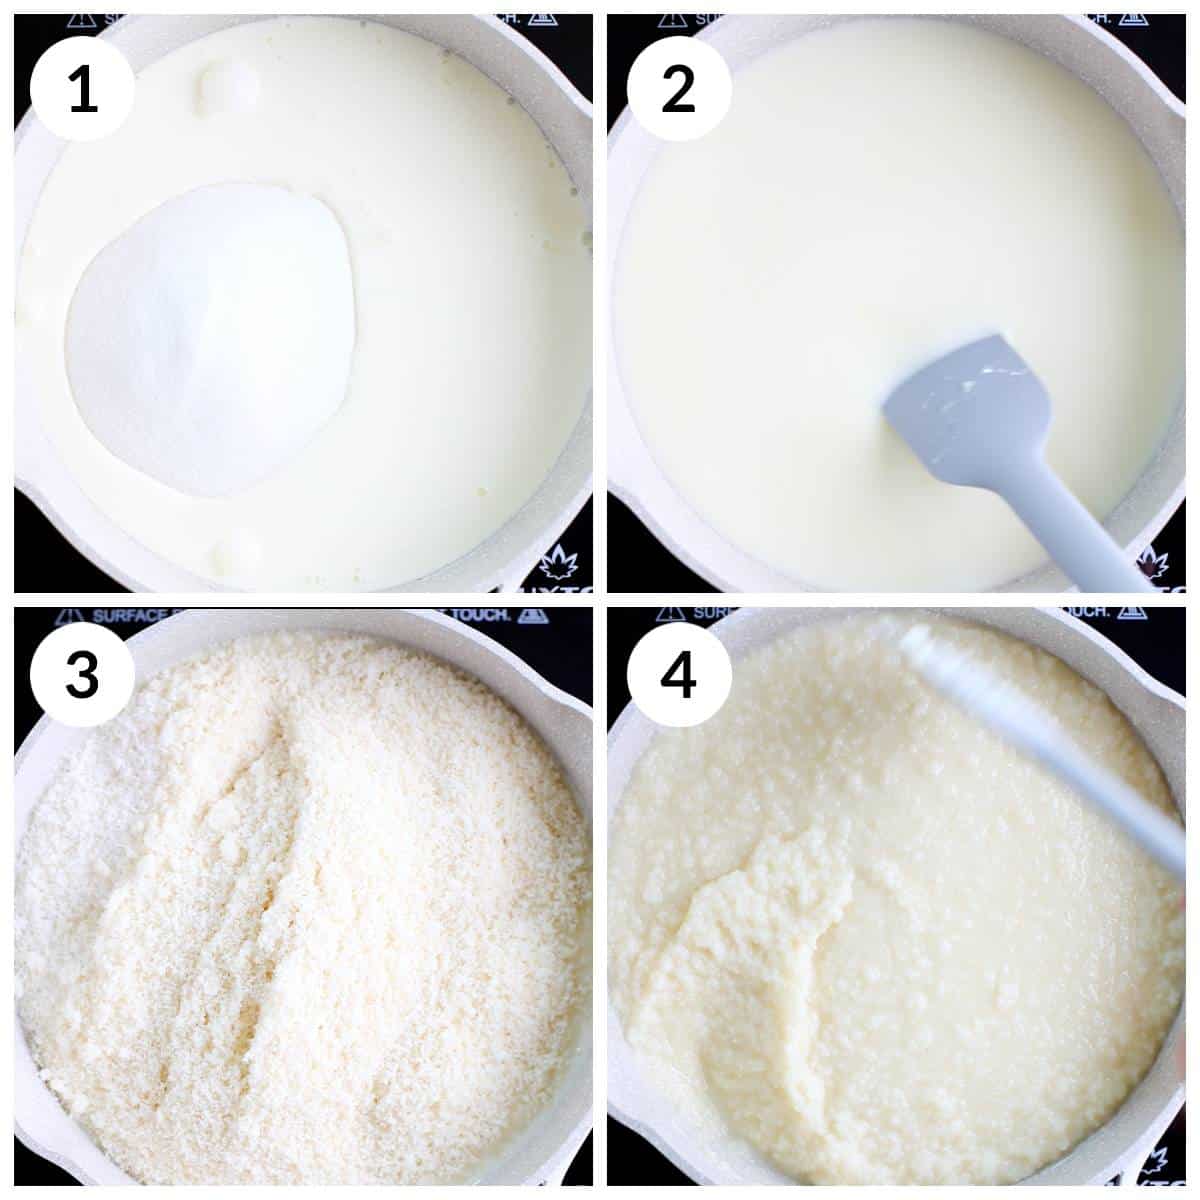 Making Coconut burfi mixture by mixing Mixing cream, milk, sugar and desiccated coconut